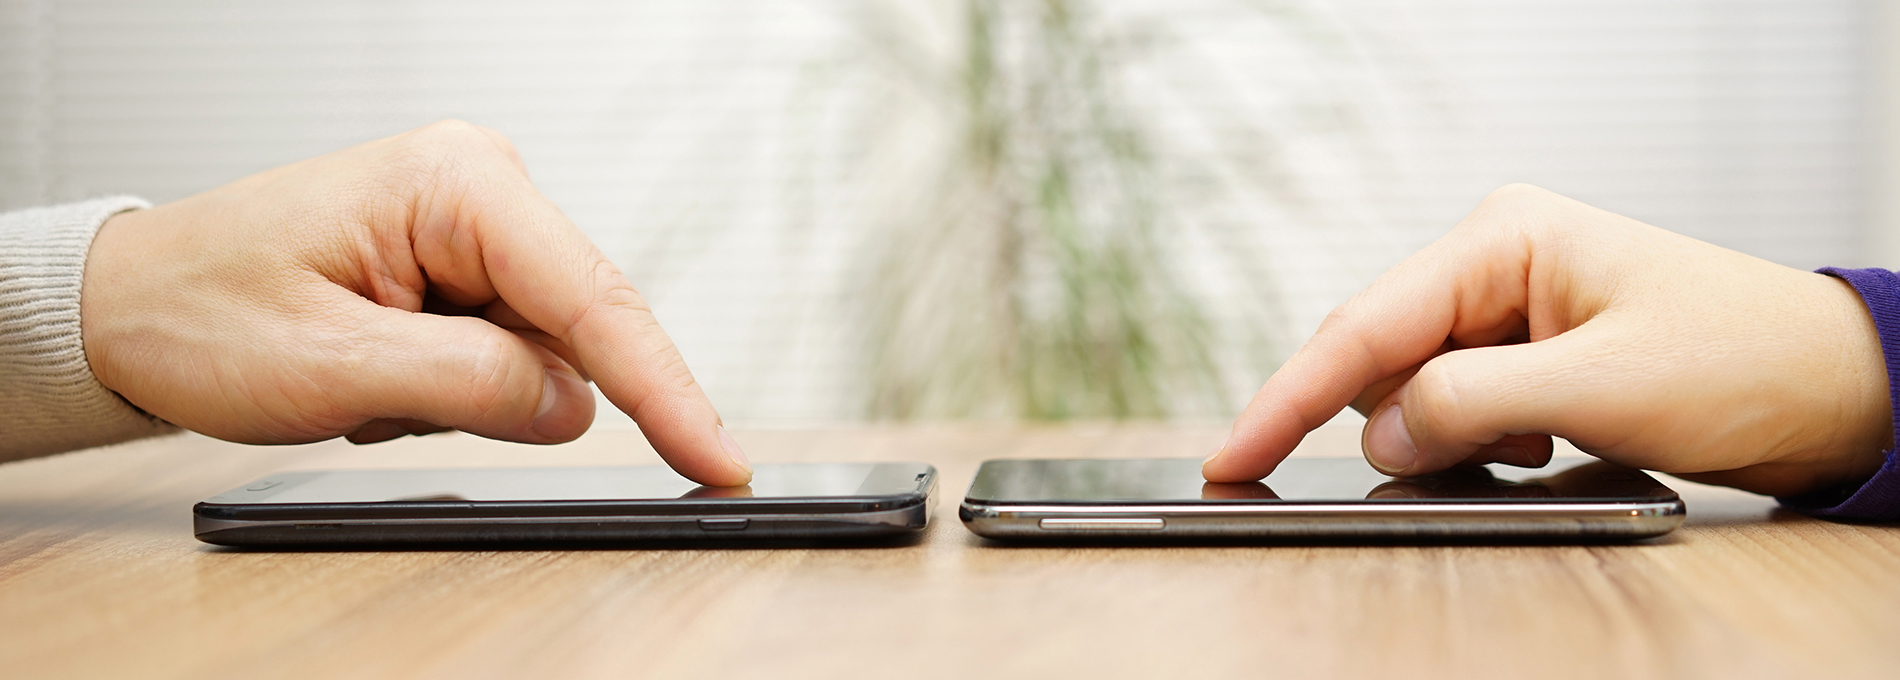 Two smartphone devices placed on a table next to each other with two people placing one of their index fingers on the screen